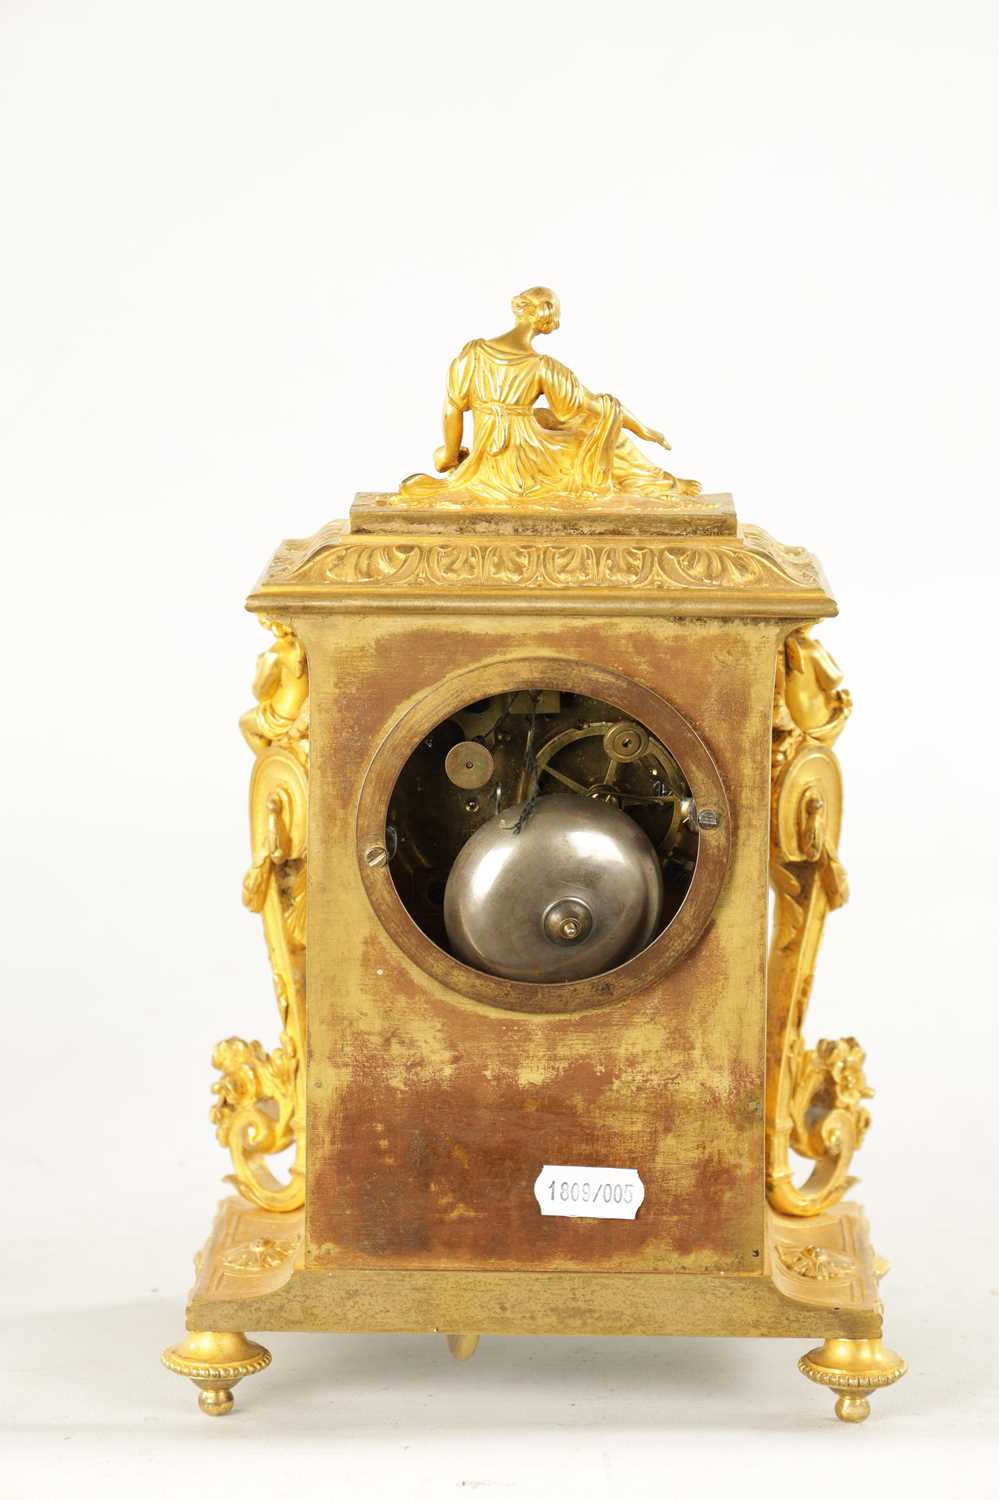 LEROY A PARIS. A 19TH CENTURY FRENCH ORMOLU AND PORCELAIN PANELLED MANTEL CLOCK - Image 8 of 10